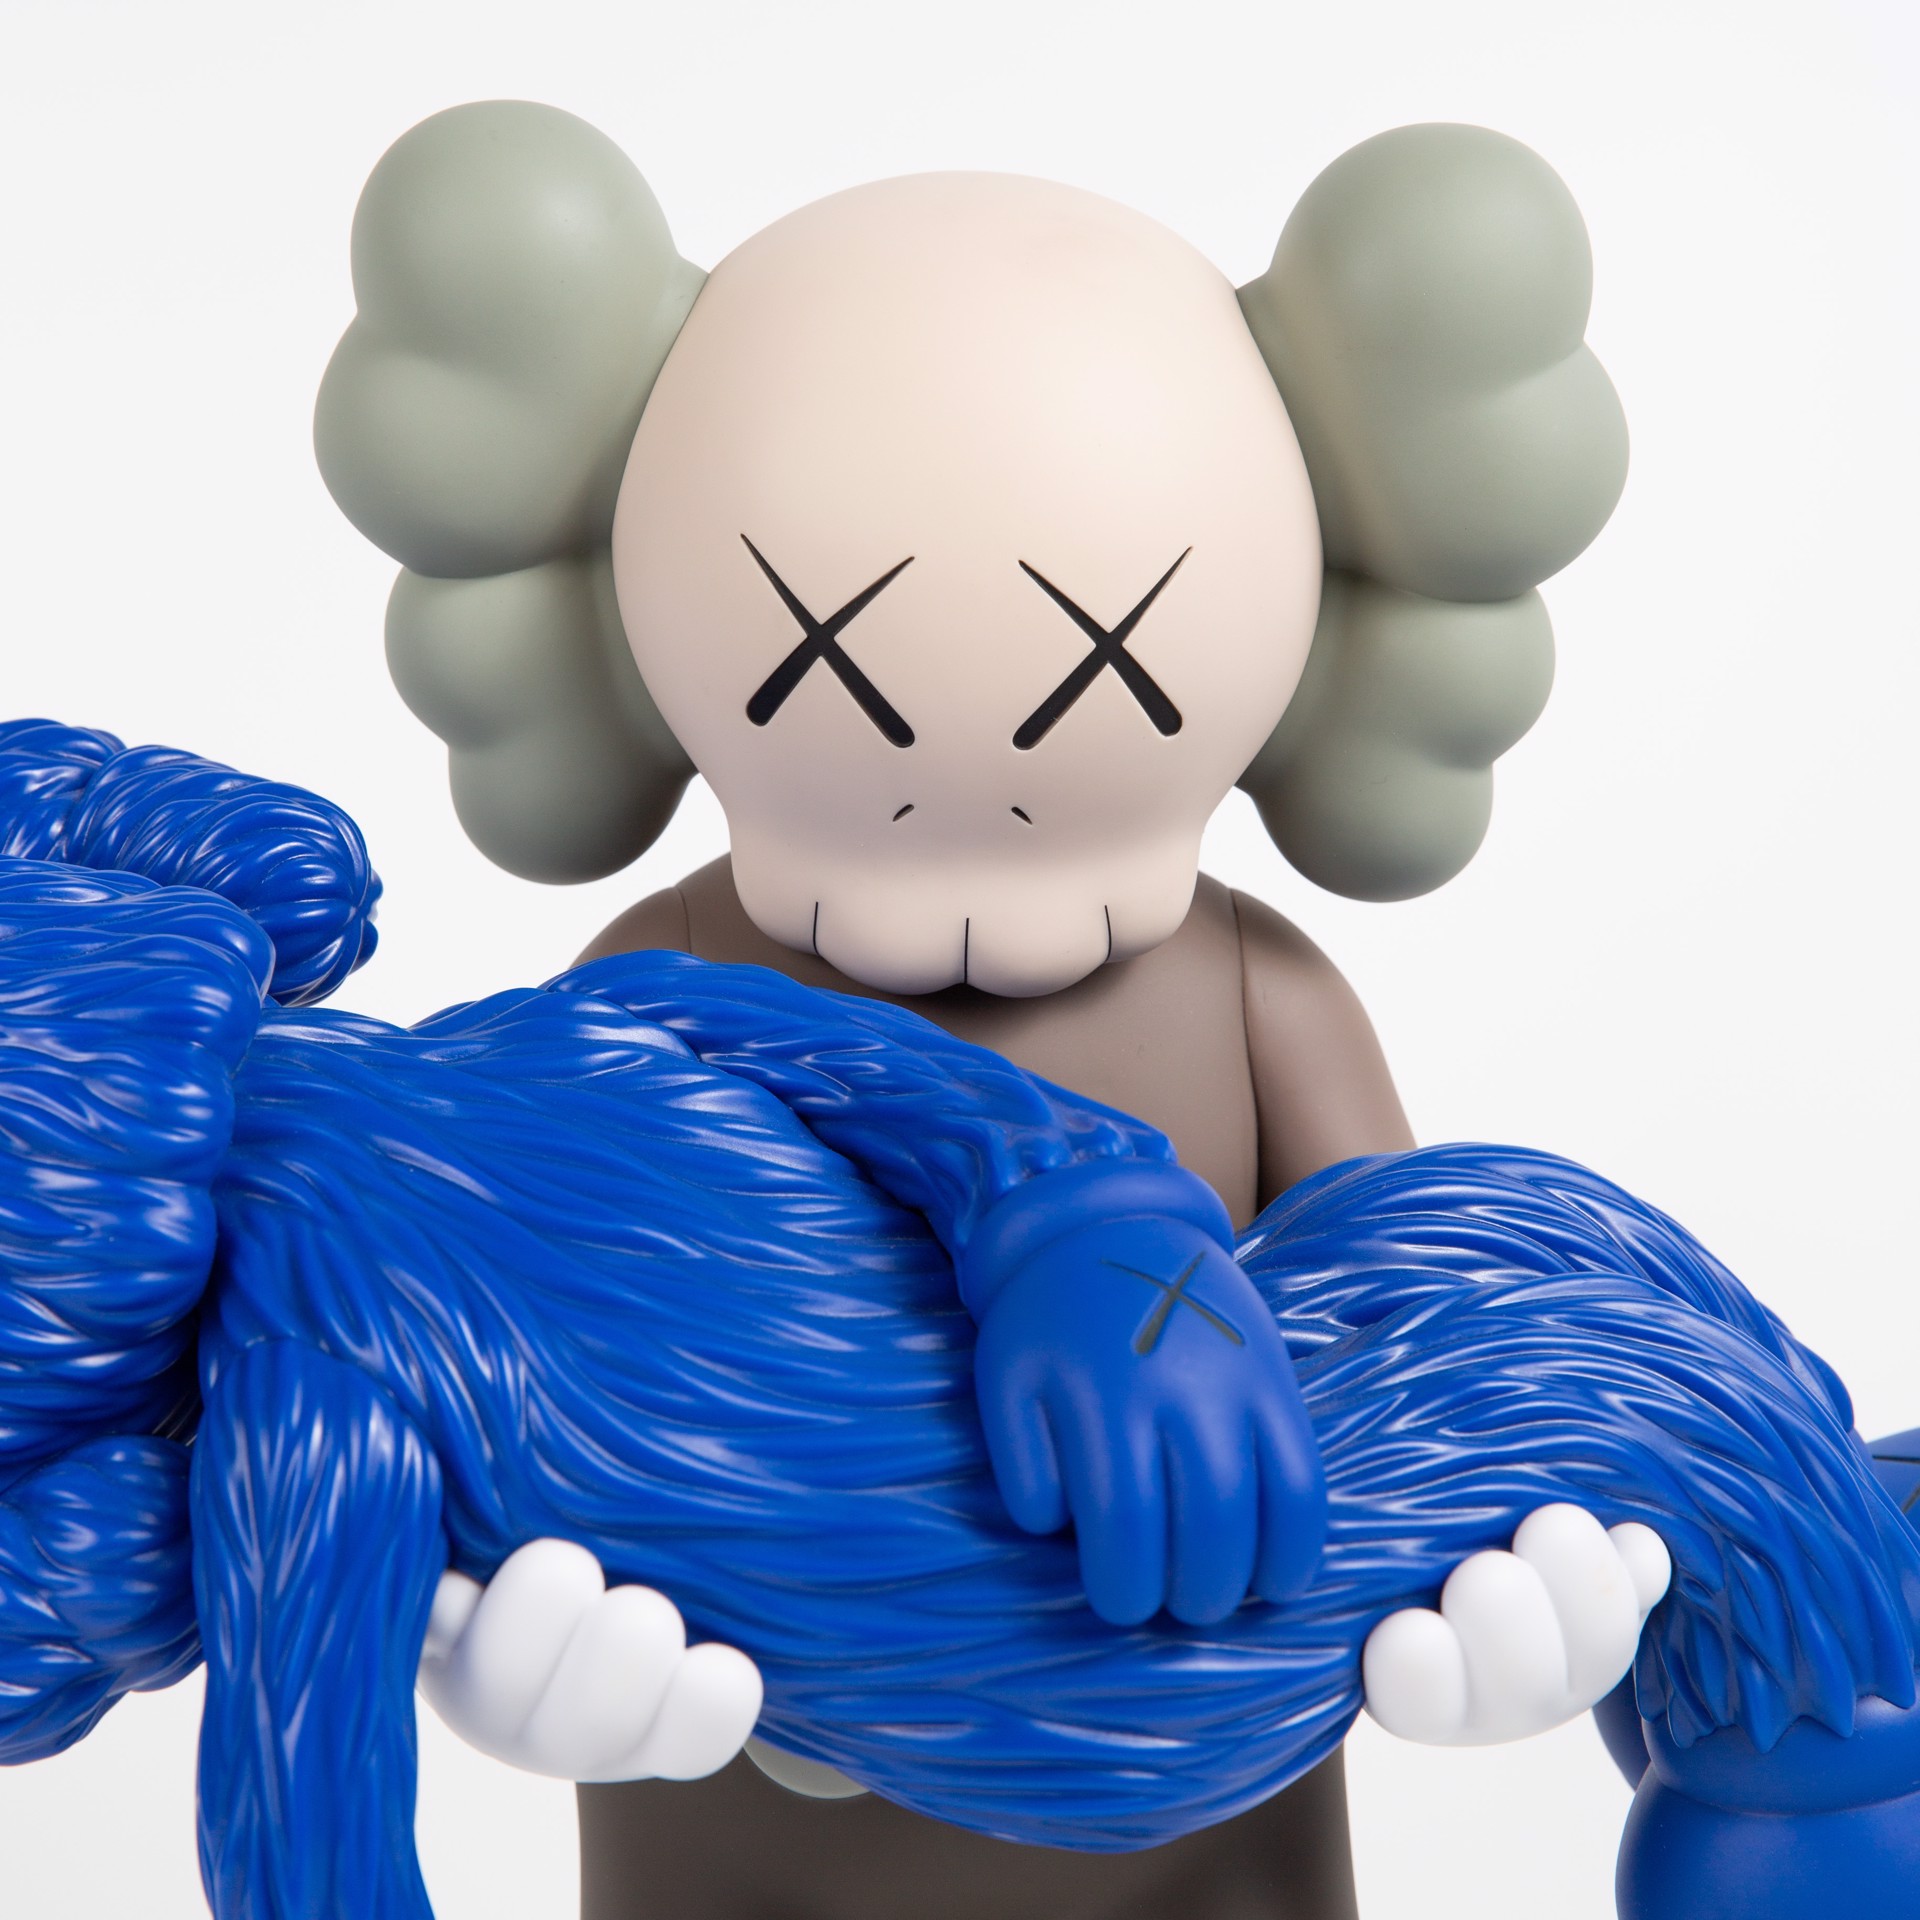 'Gone' Brown by Kaws